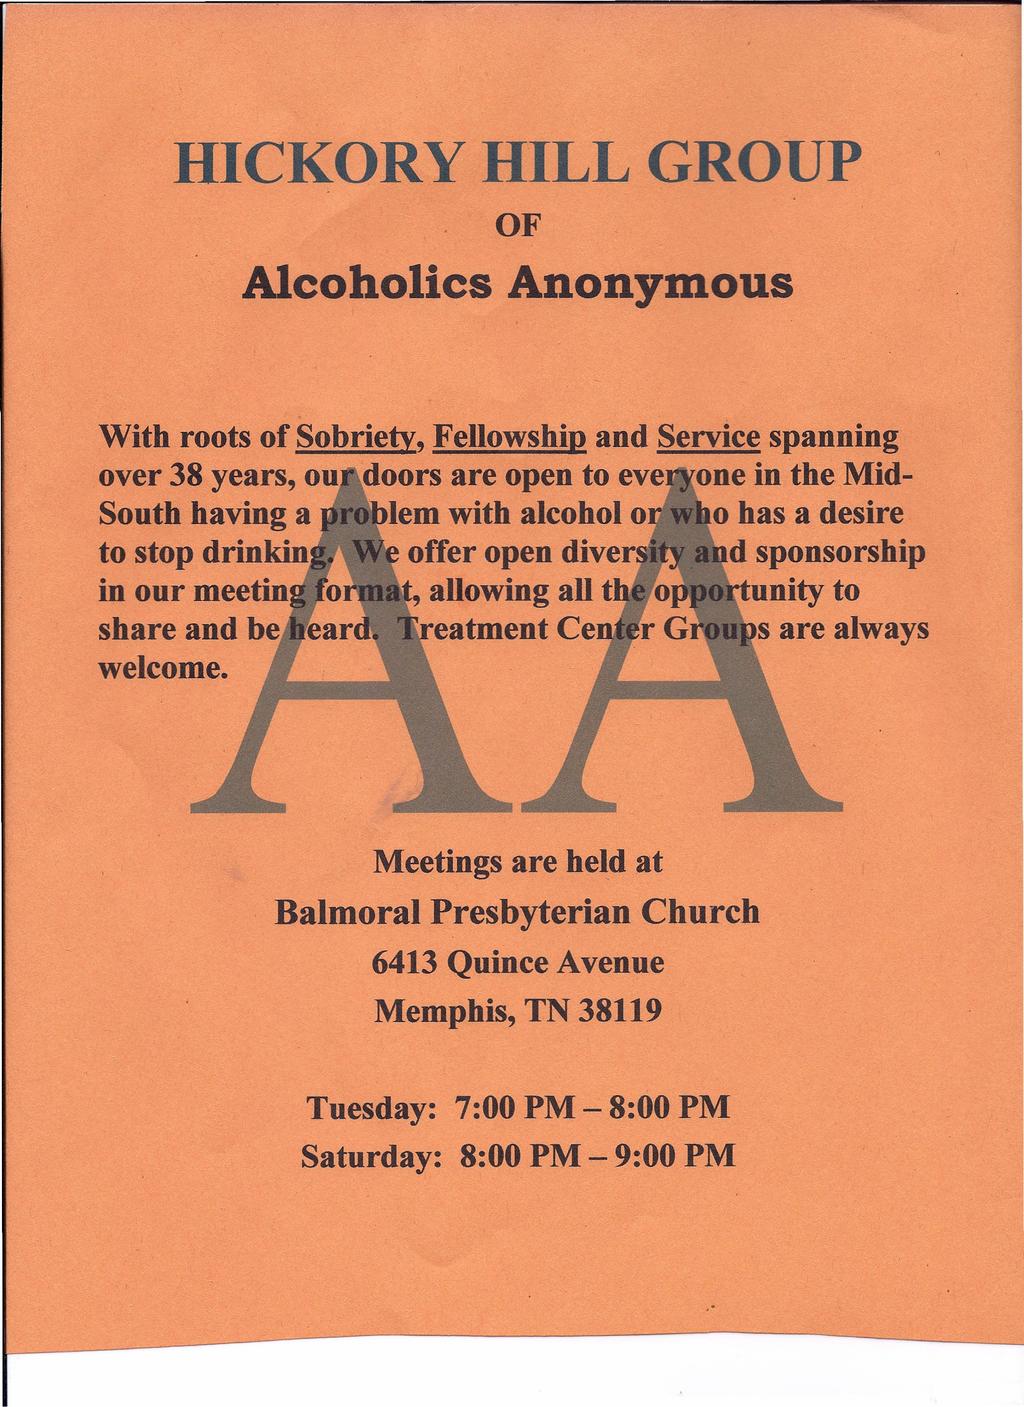 HICKORY HILL GROUP OF Alcoholics Anonymous With roots of Sobriety, FellowshiU and Service spanning over 38 years, ou doors are open to eve one in the MidSouth having a 'Iem with alcohol 0 0 has a